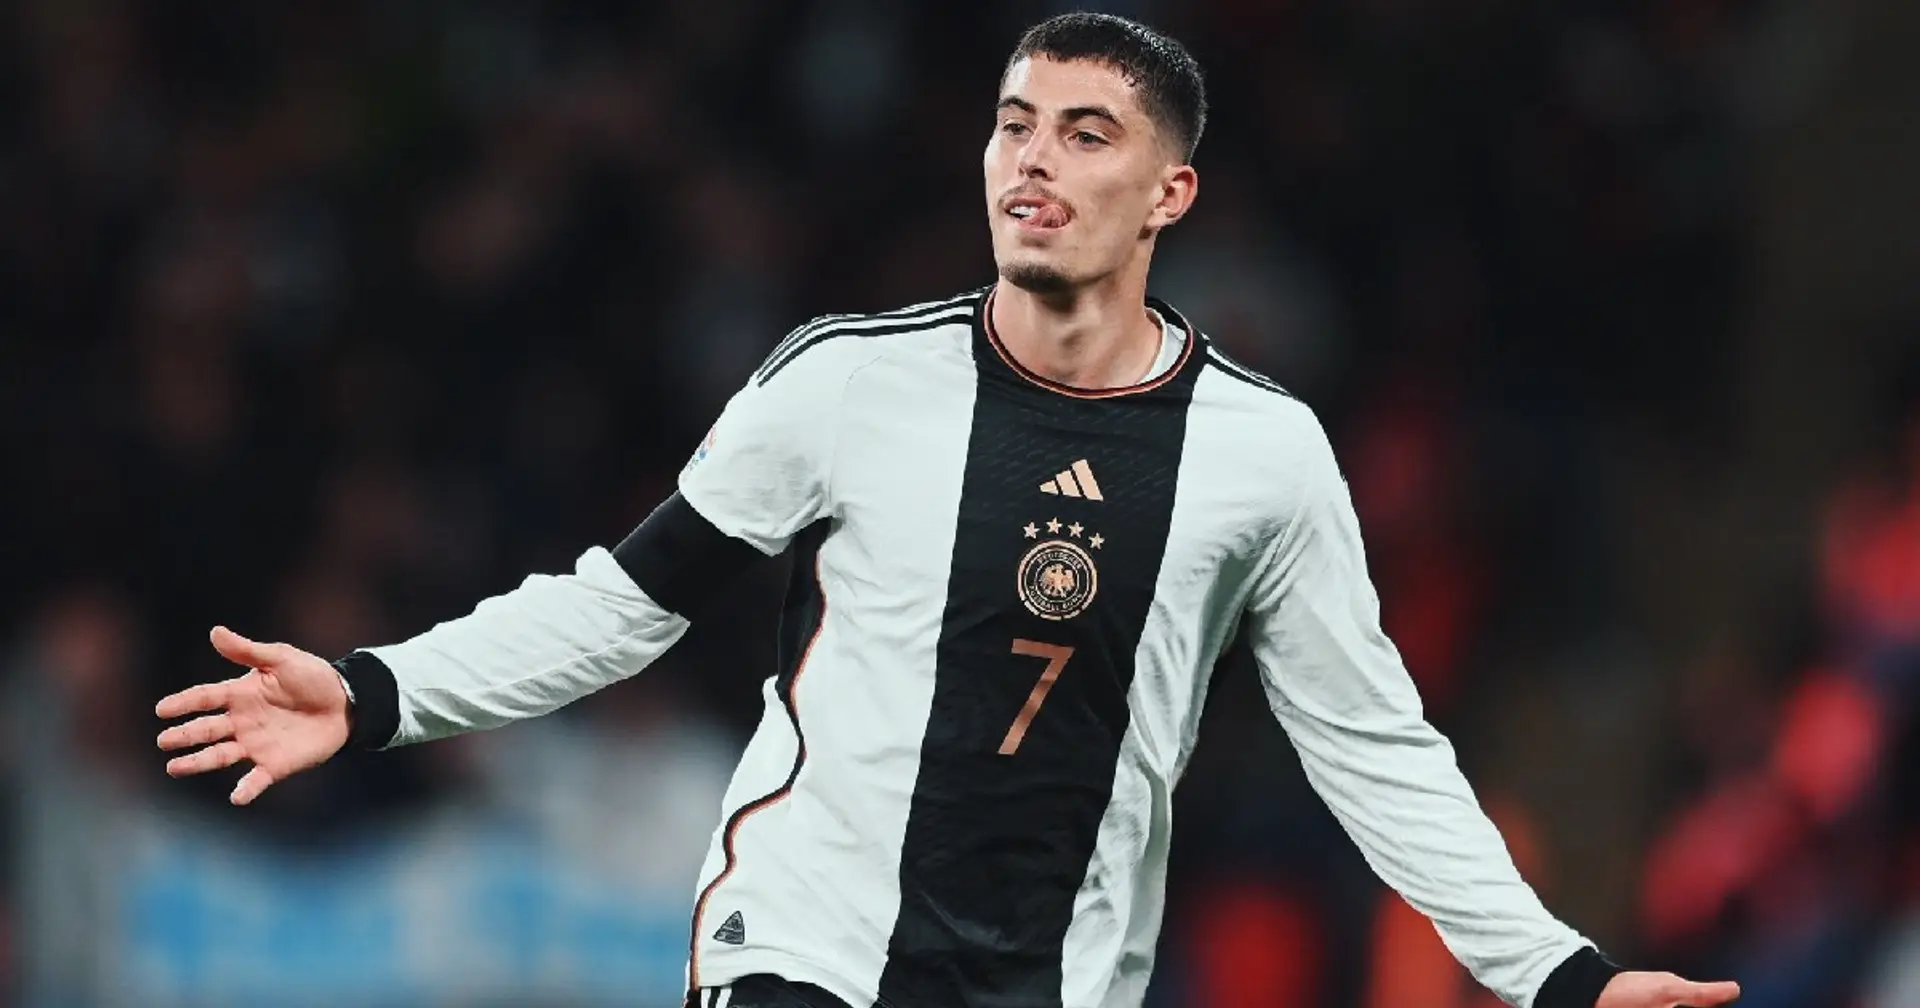 Kai Havertz shines for Germany & 2 more big Arsenal stories you might've missed